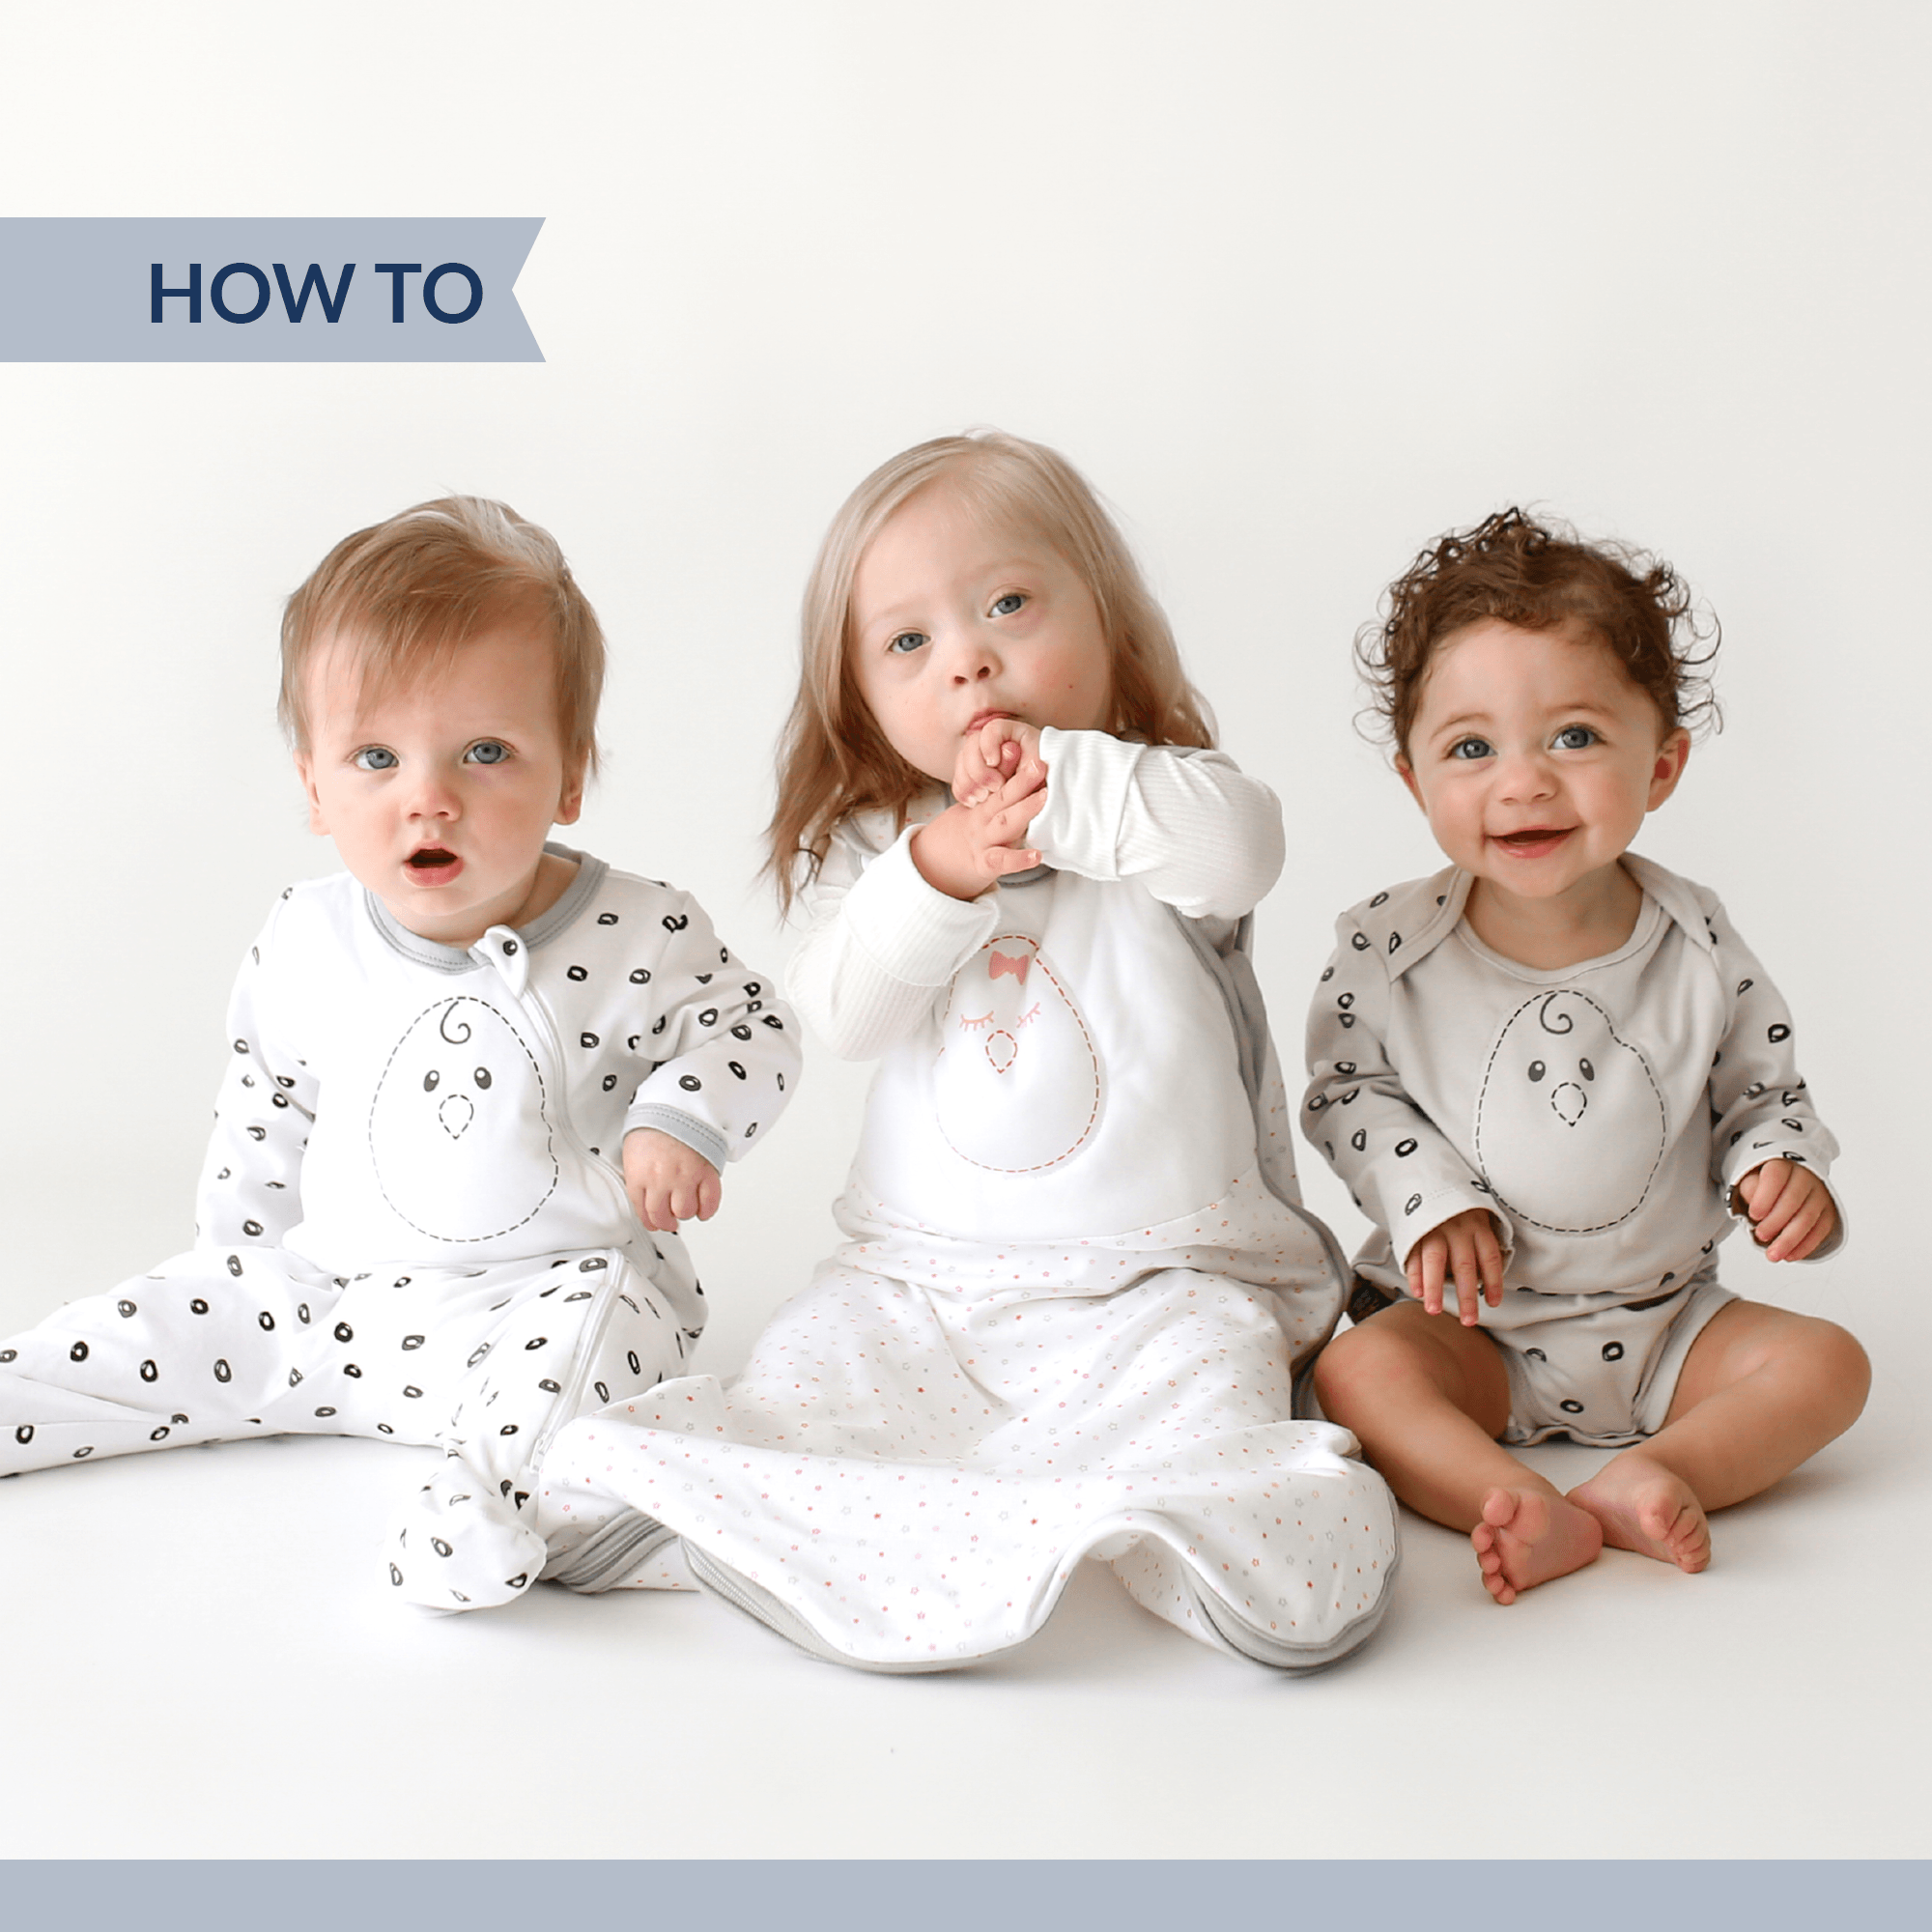 Pick the Best Sleepwear: Simple Tips to Dress Baby for Bed in Any Temperature